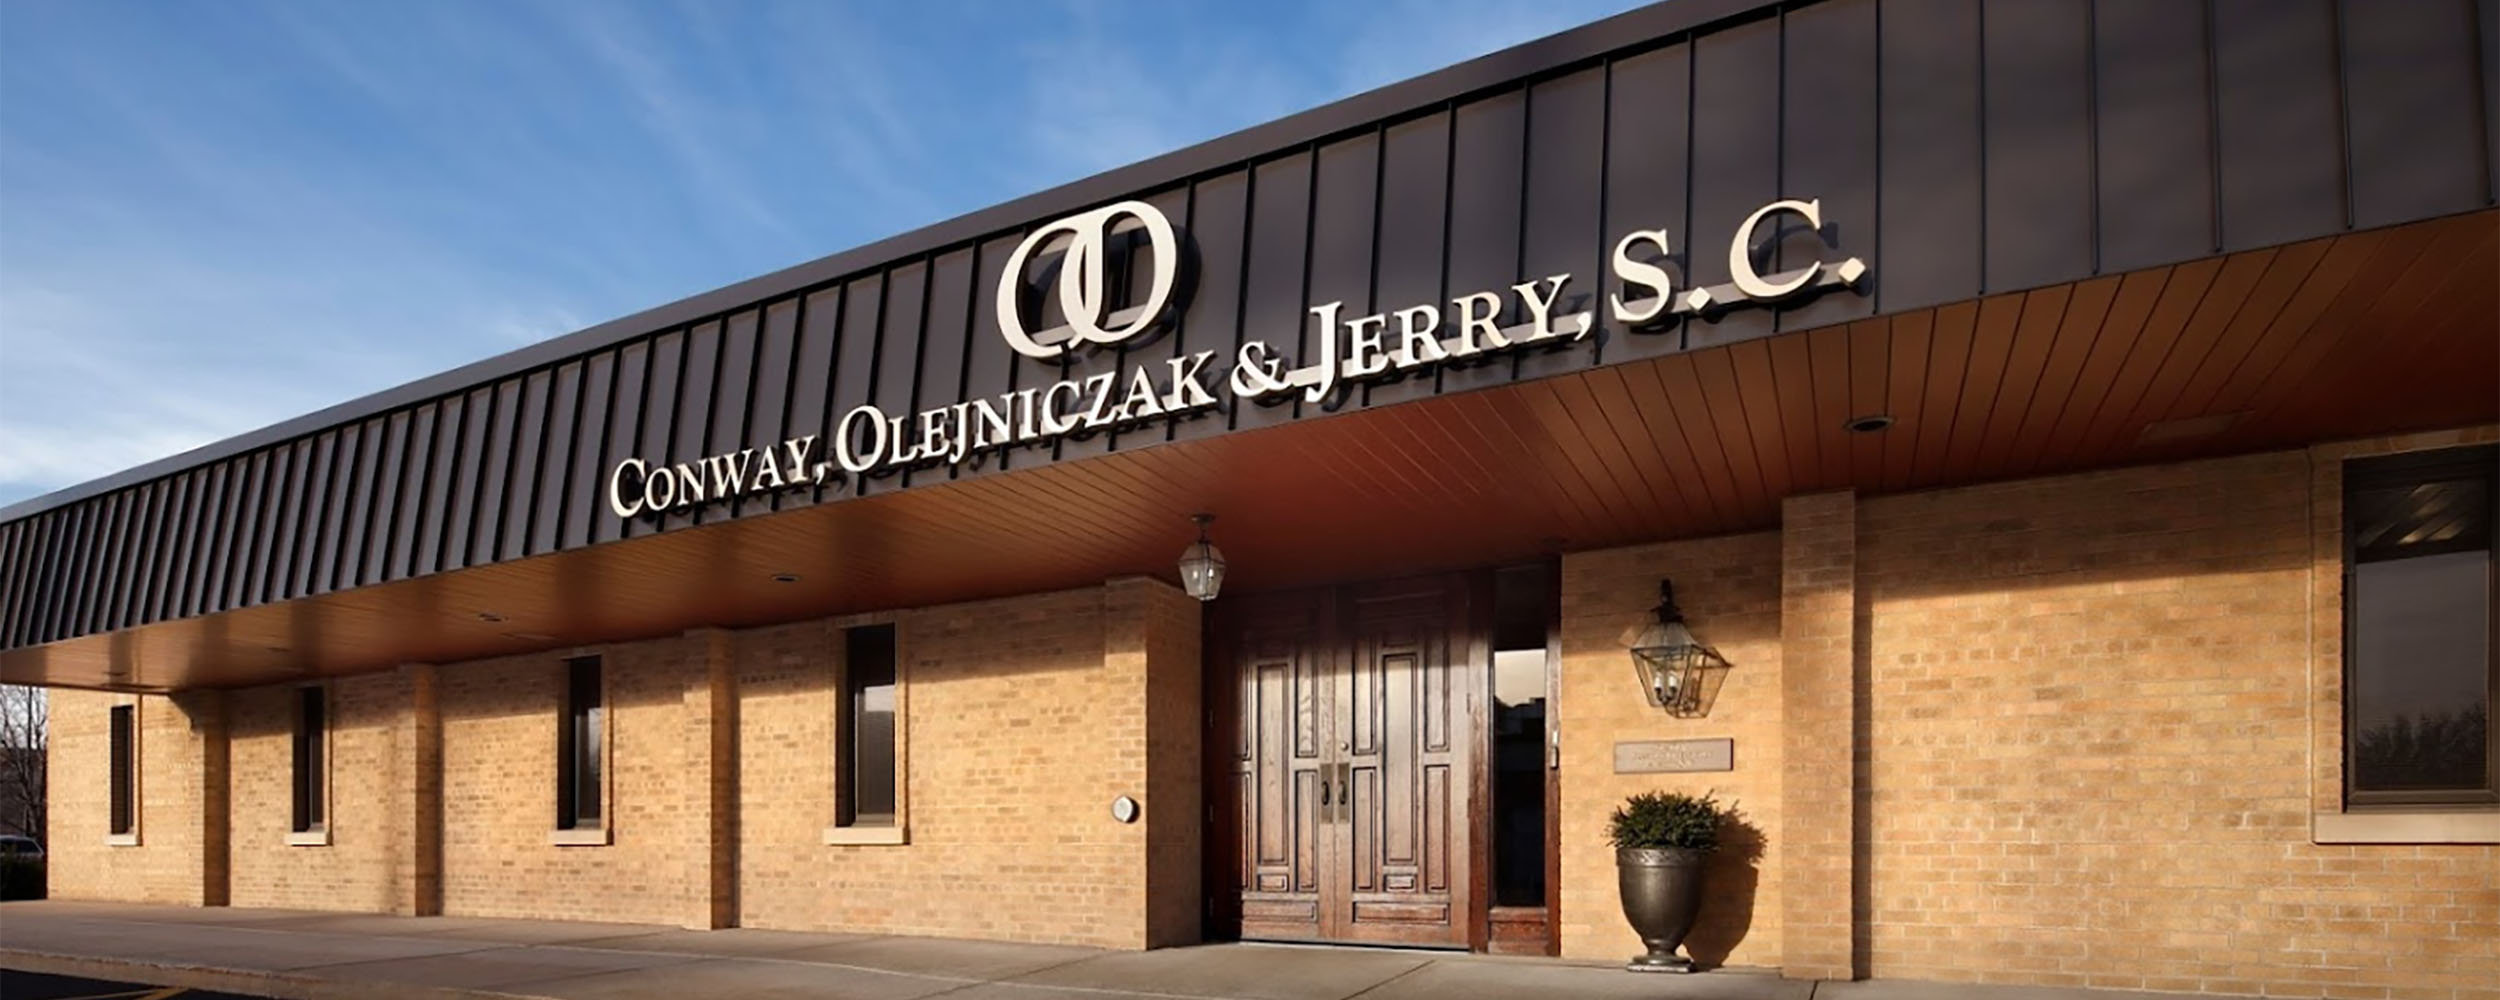 Front exterior of the law firm of the Conway Olejniczak, and Jerry S.C. office